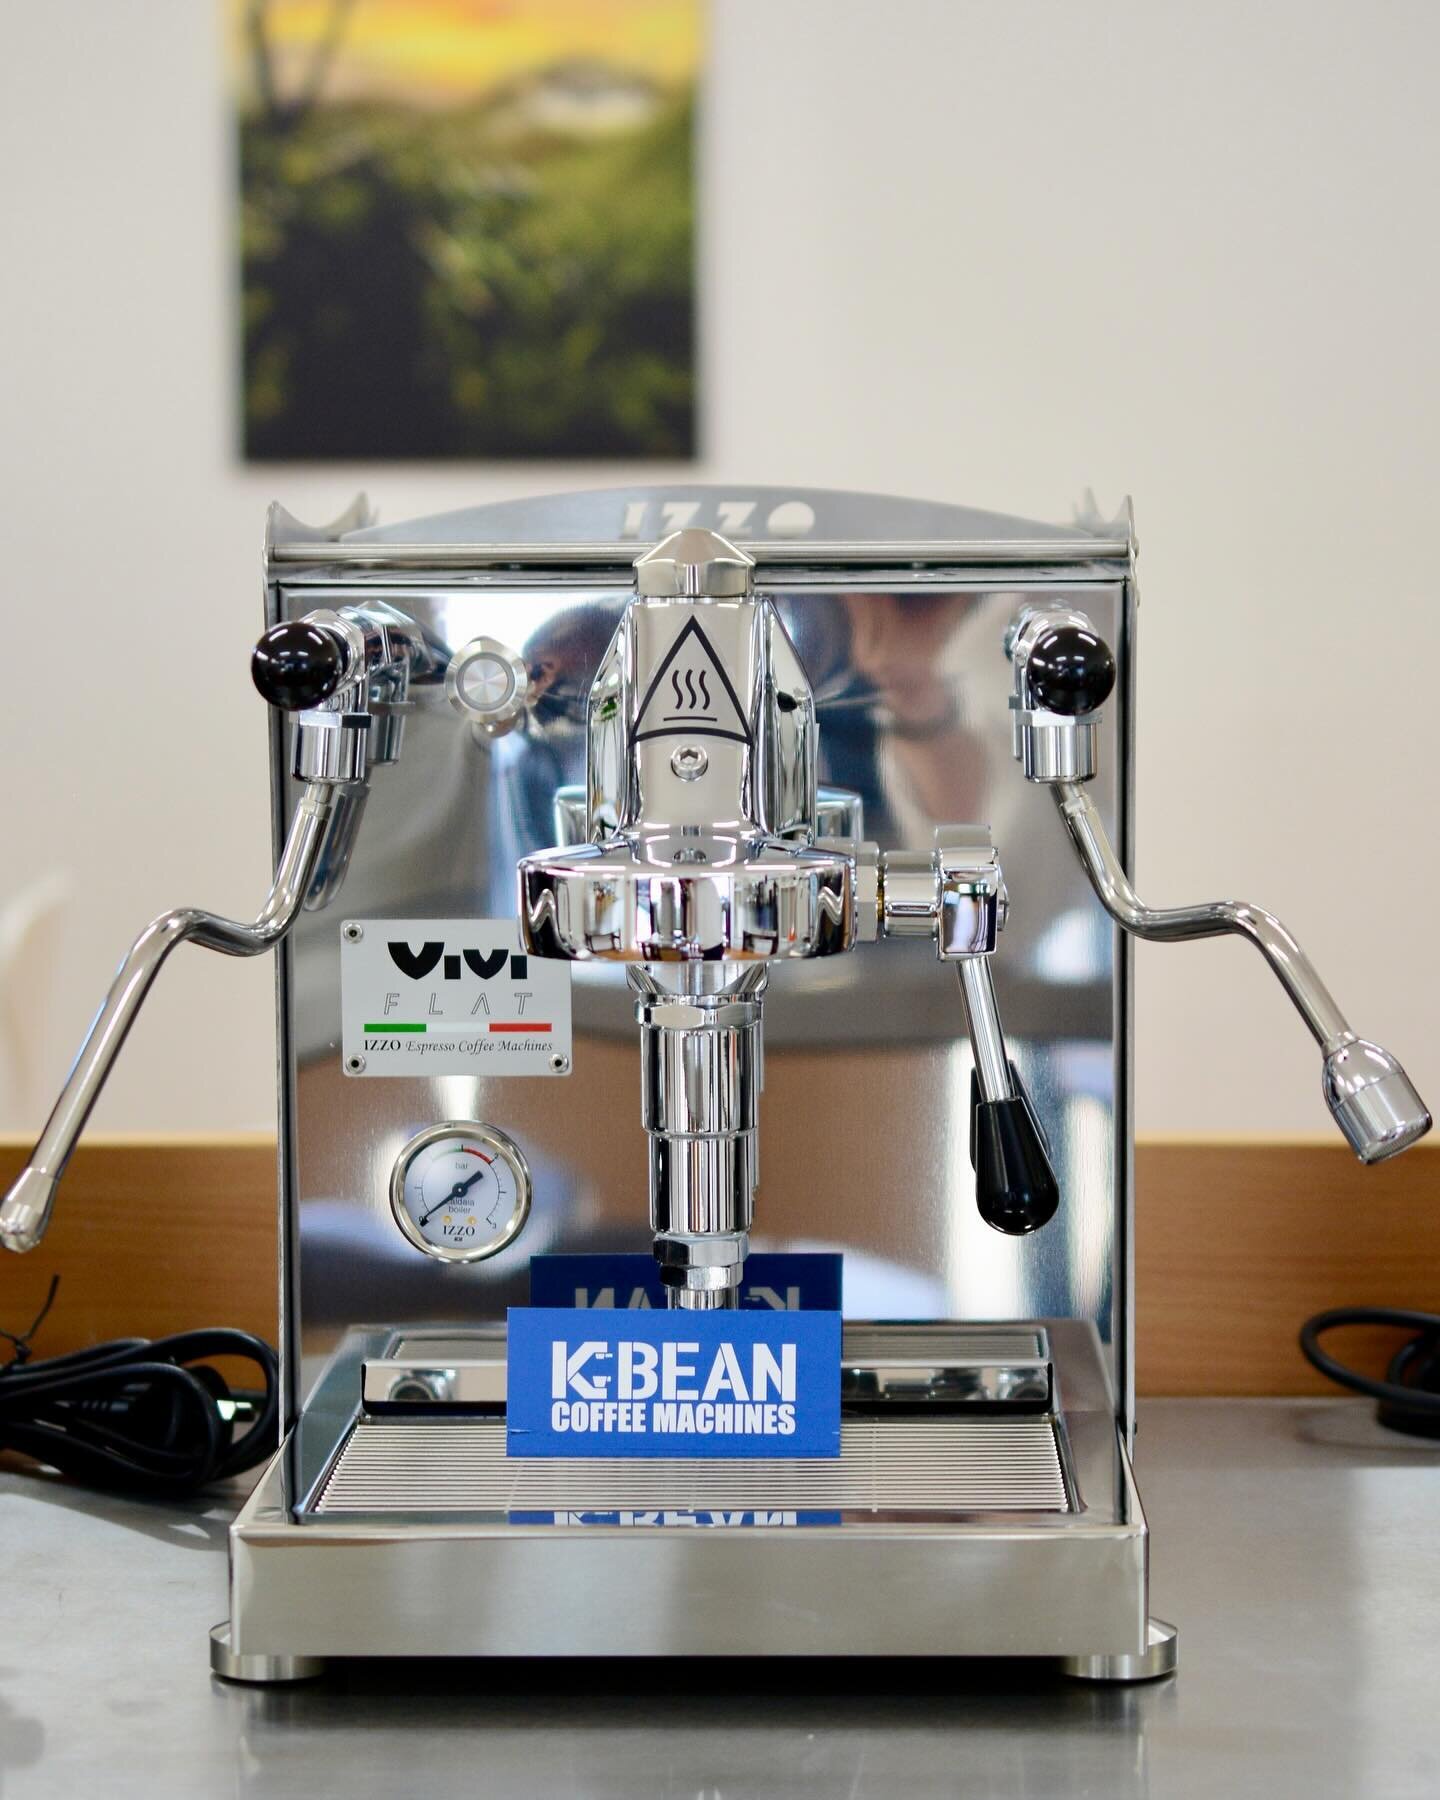 The Izzo Vivi Flat is a brilliant hand built Italian coffee machine made fully out of high grade stainless steel tested for quality, finish and functionality there is no compromise when you buy the Vivi Flat

#coffee #coffeemachine #izzovivi #izzo #i